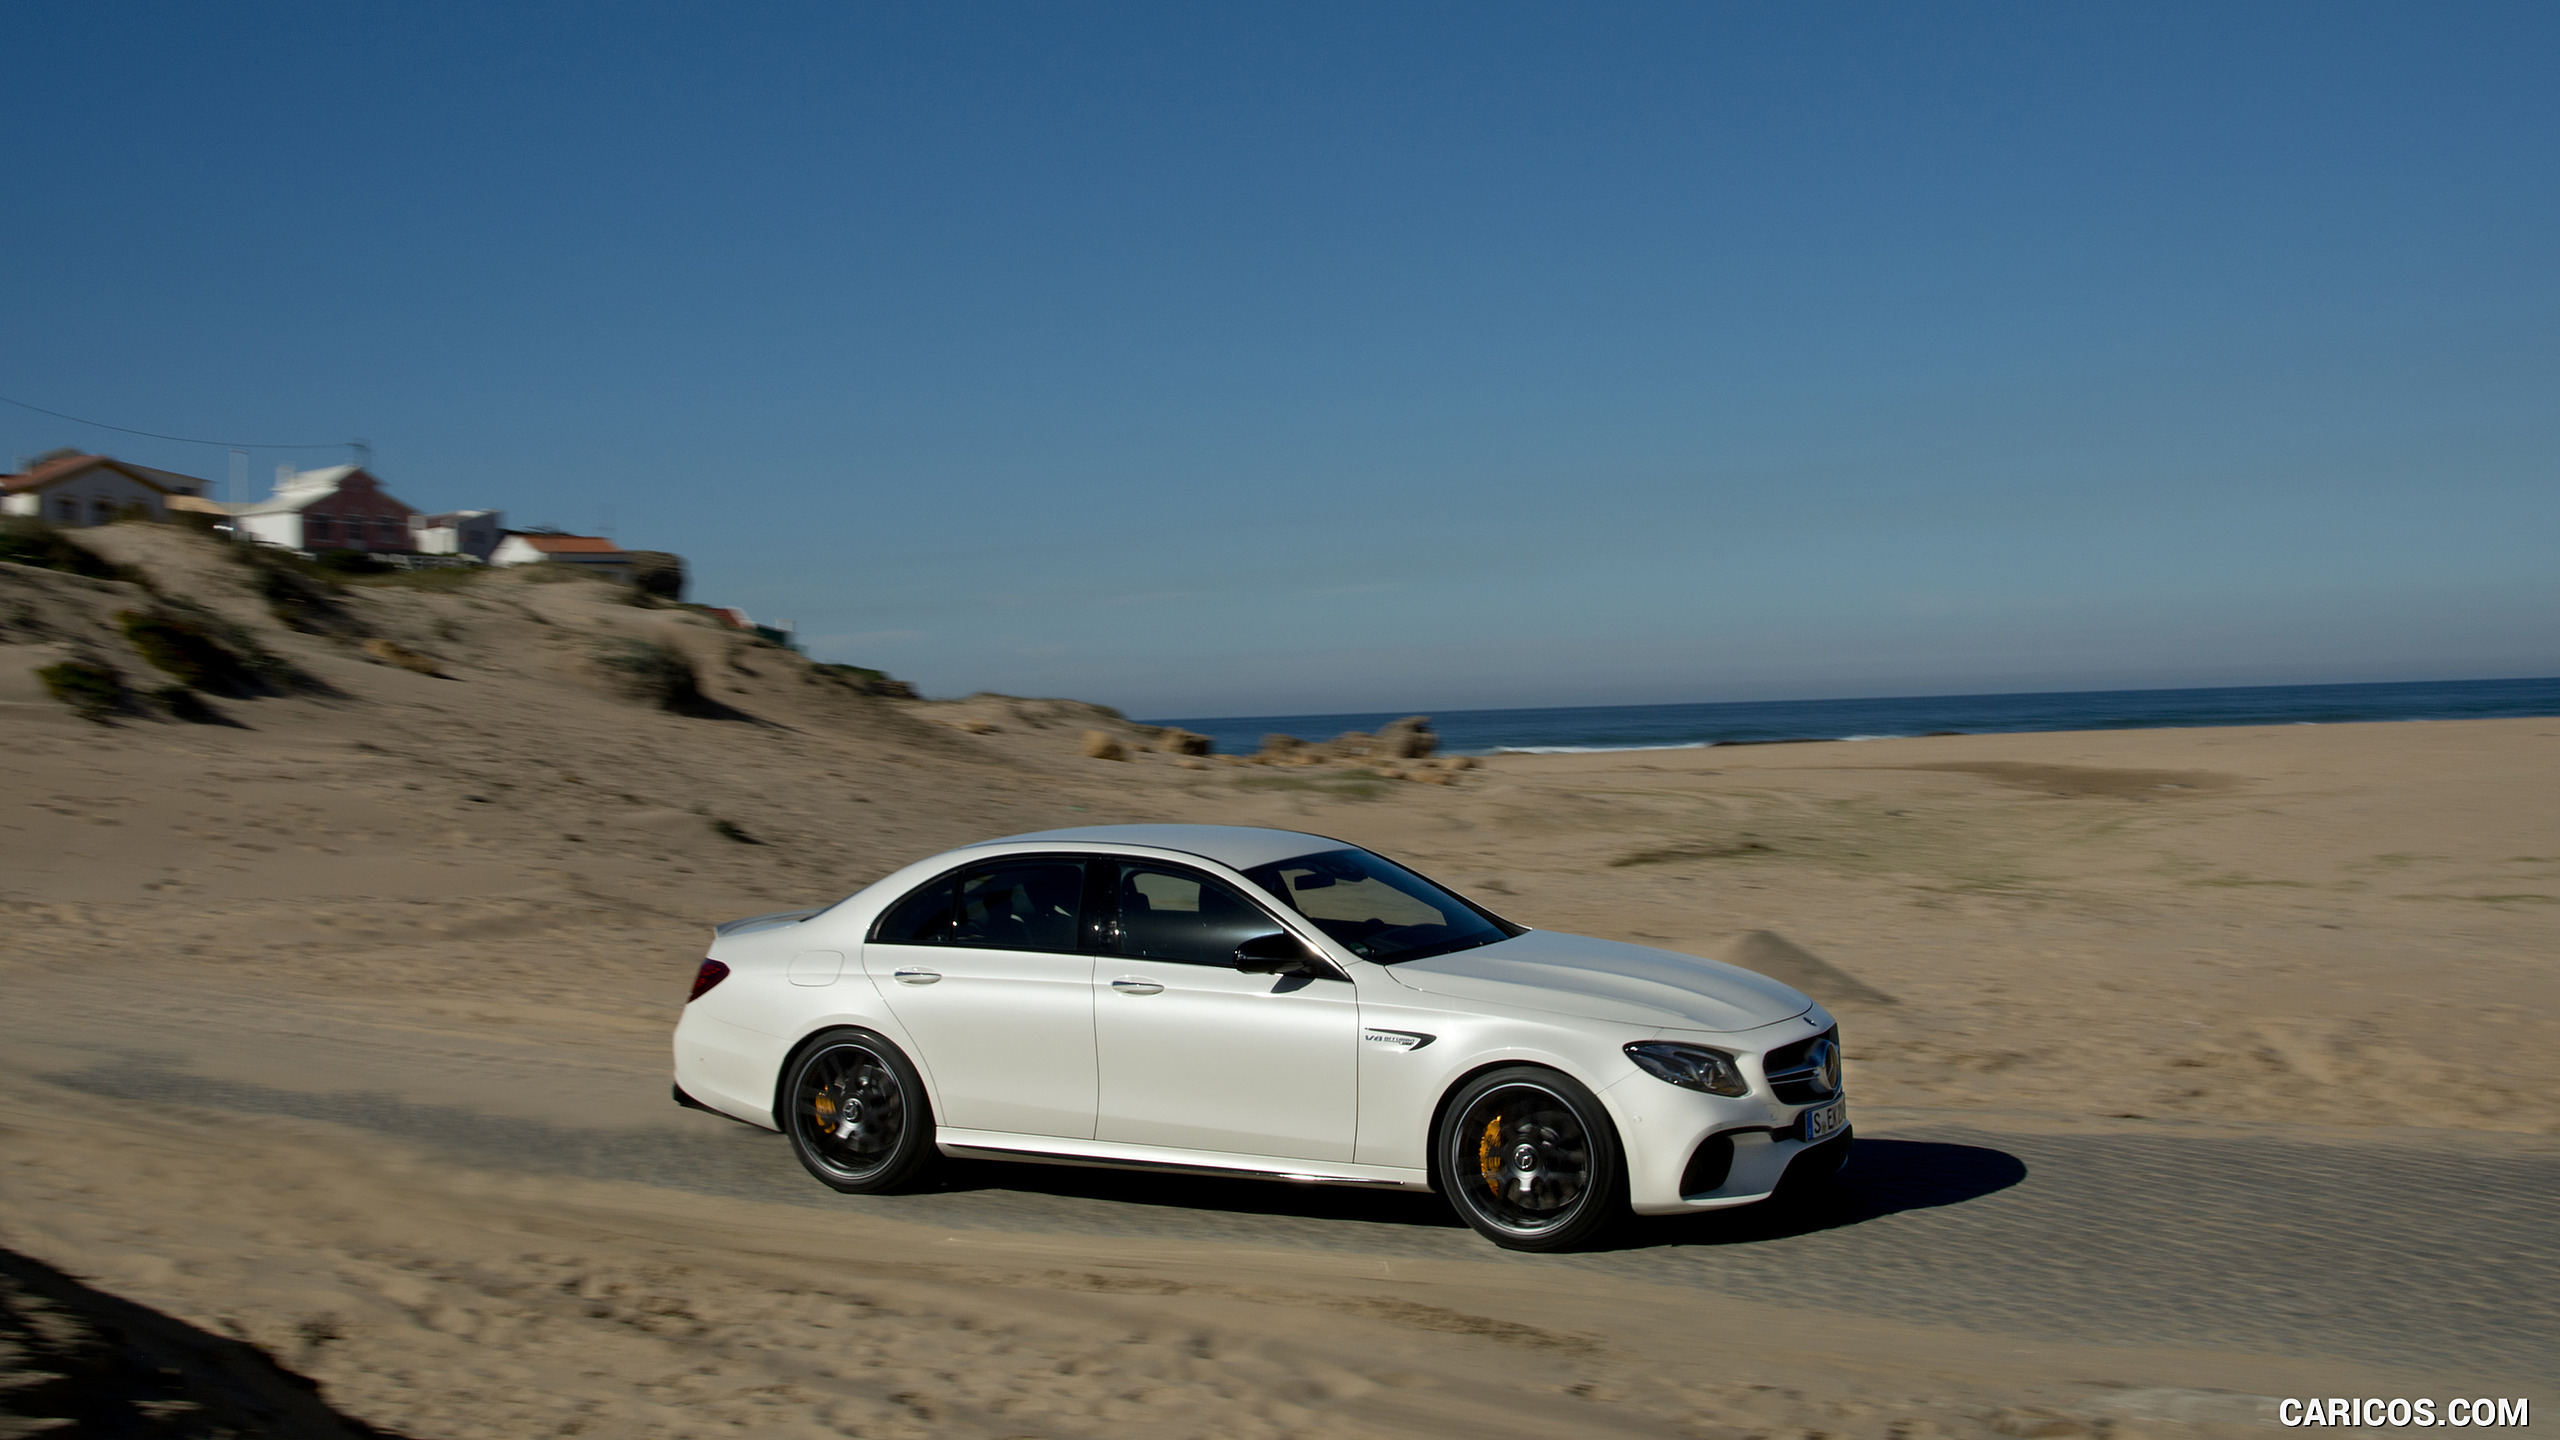 2018 Mercedes-AMG E63 S 4MATIC+ - Side, #56 of 323